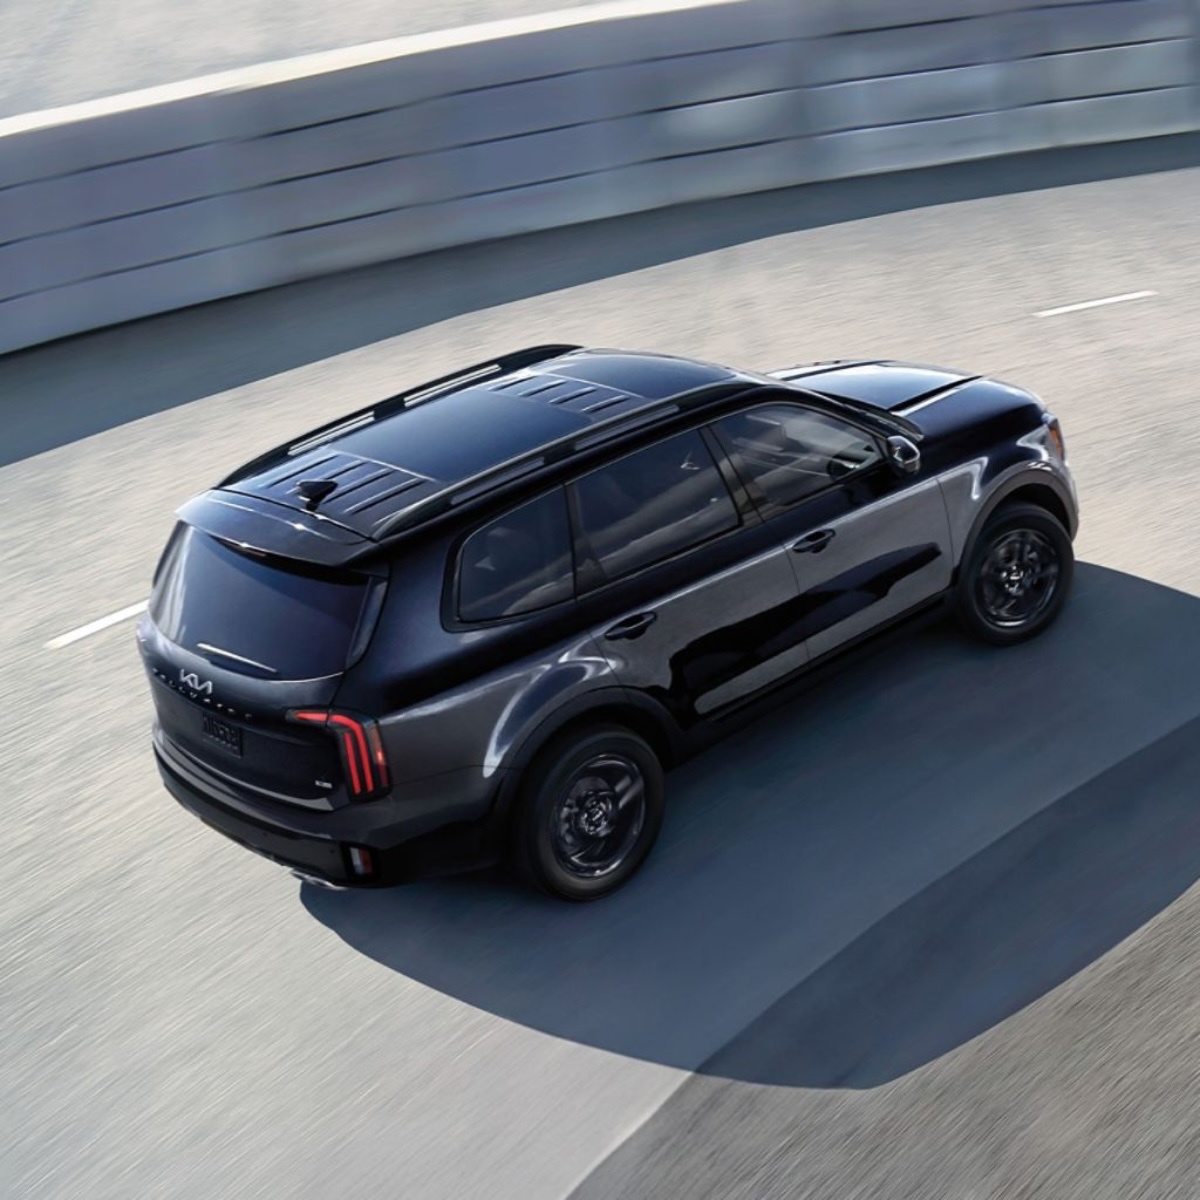 It's time to transform your daily drive into a journey of style with the help of a sleek 2024 #KiaTelluride. 👀✨ Come by today and take your first step towards elevating your ride to this beauty. 😉 #CarCrushWednesday #Kia #KiauSA